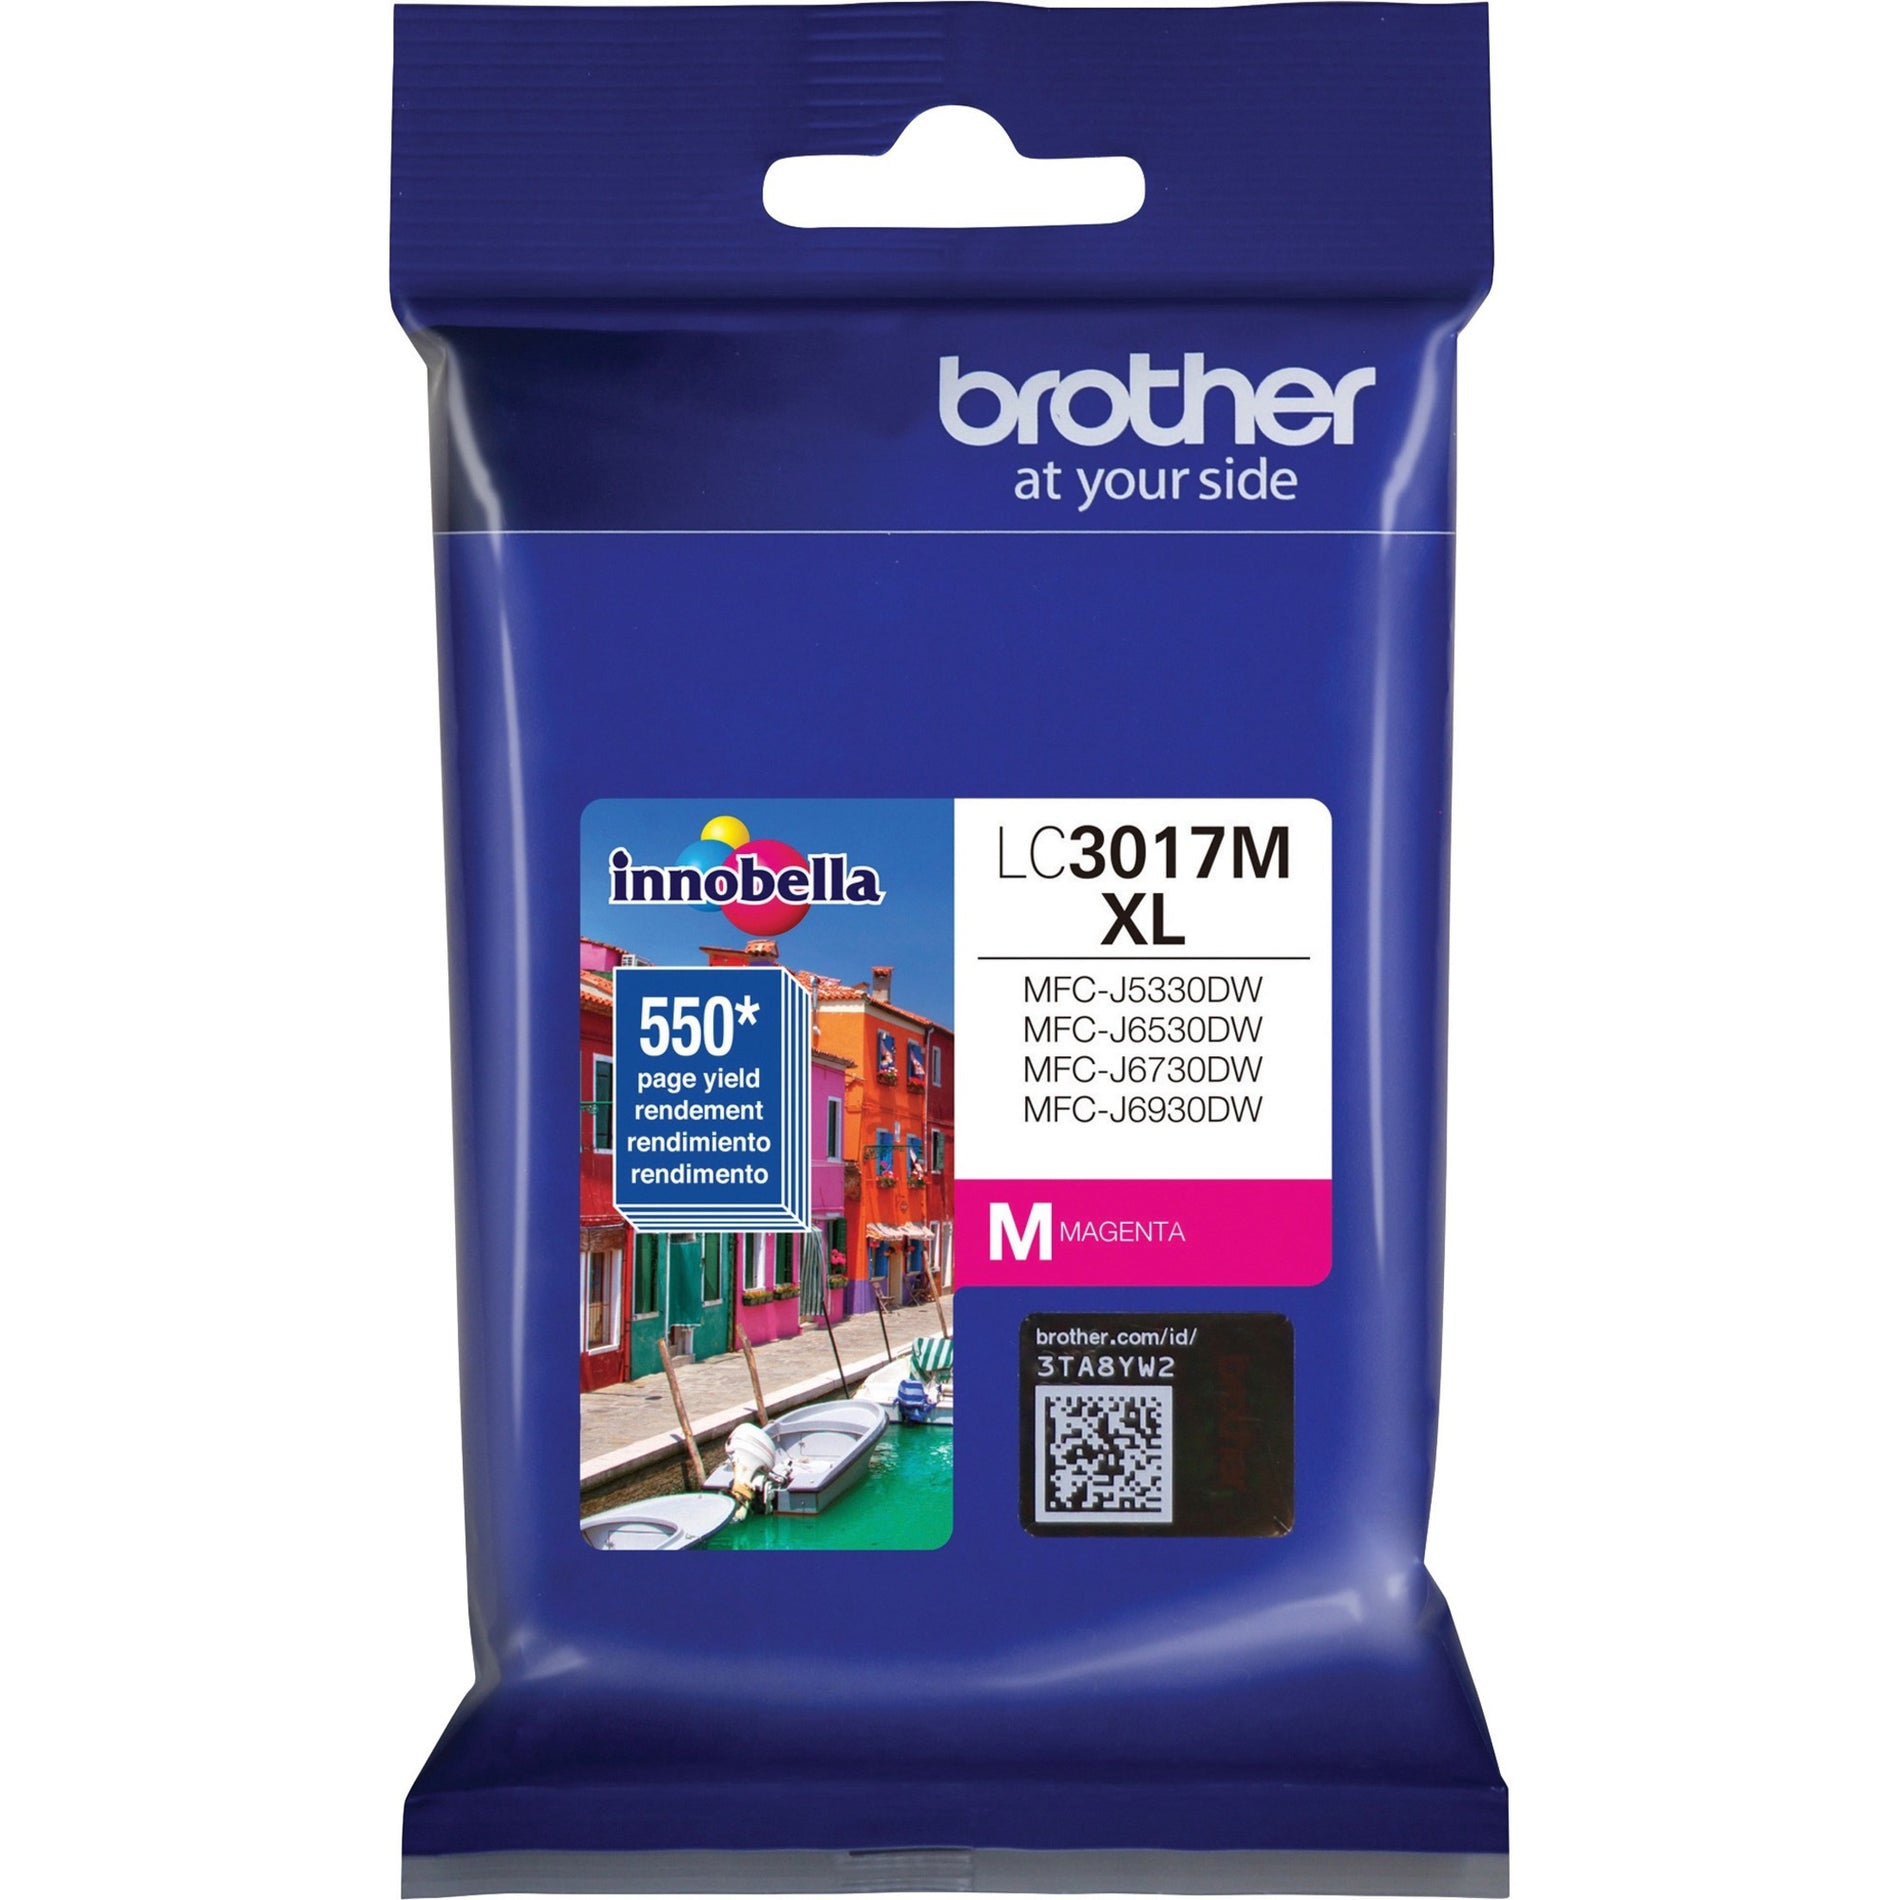 Brother LC3017M Innobella High Yield Ink Cartridge, Magenta - 550 Pages